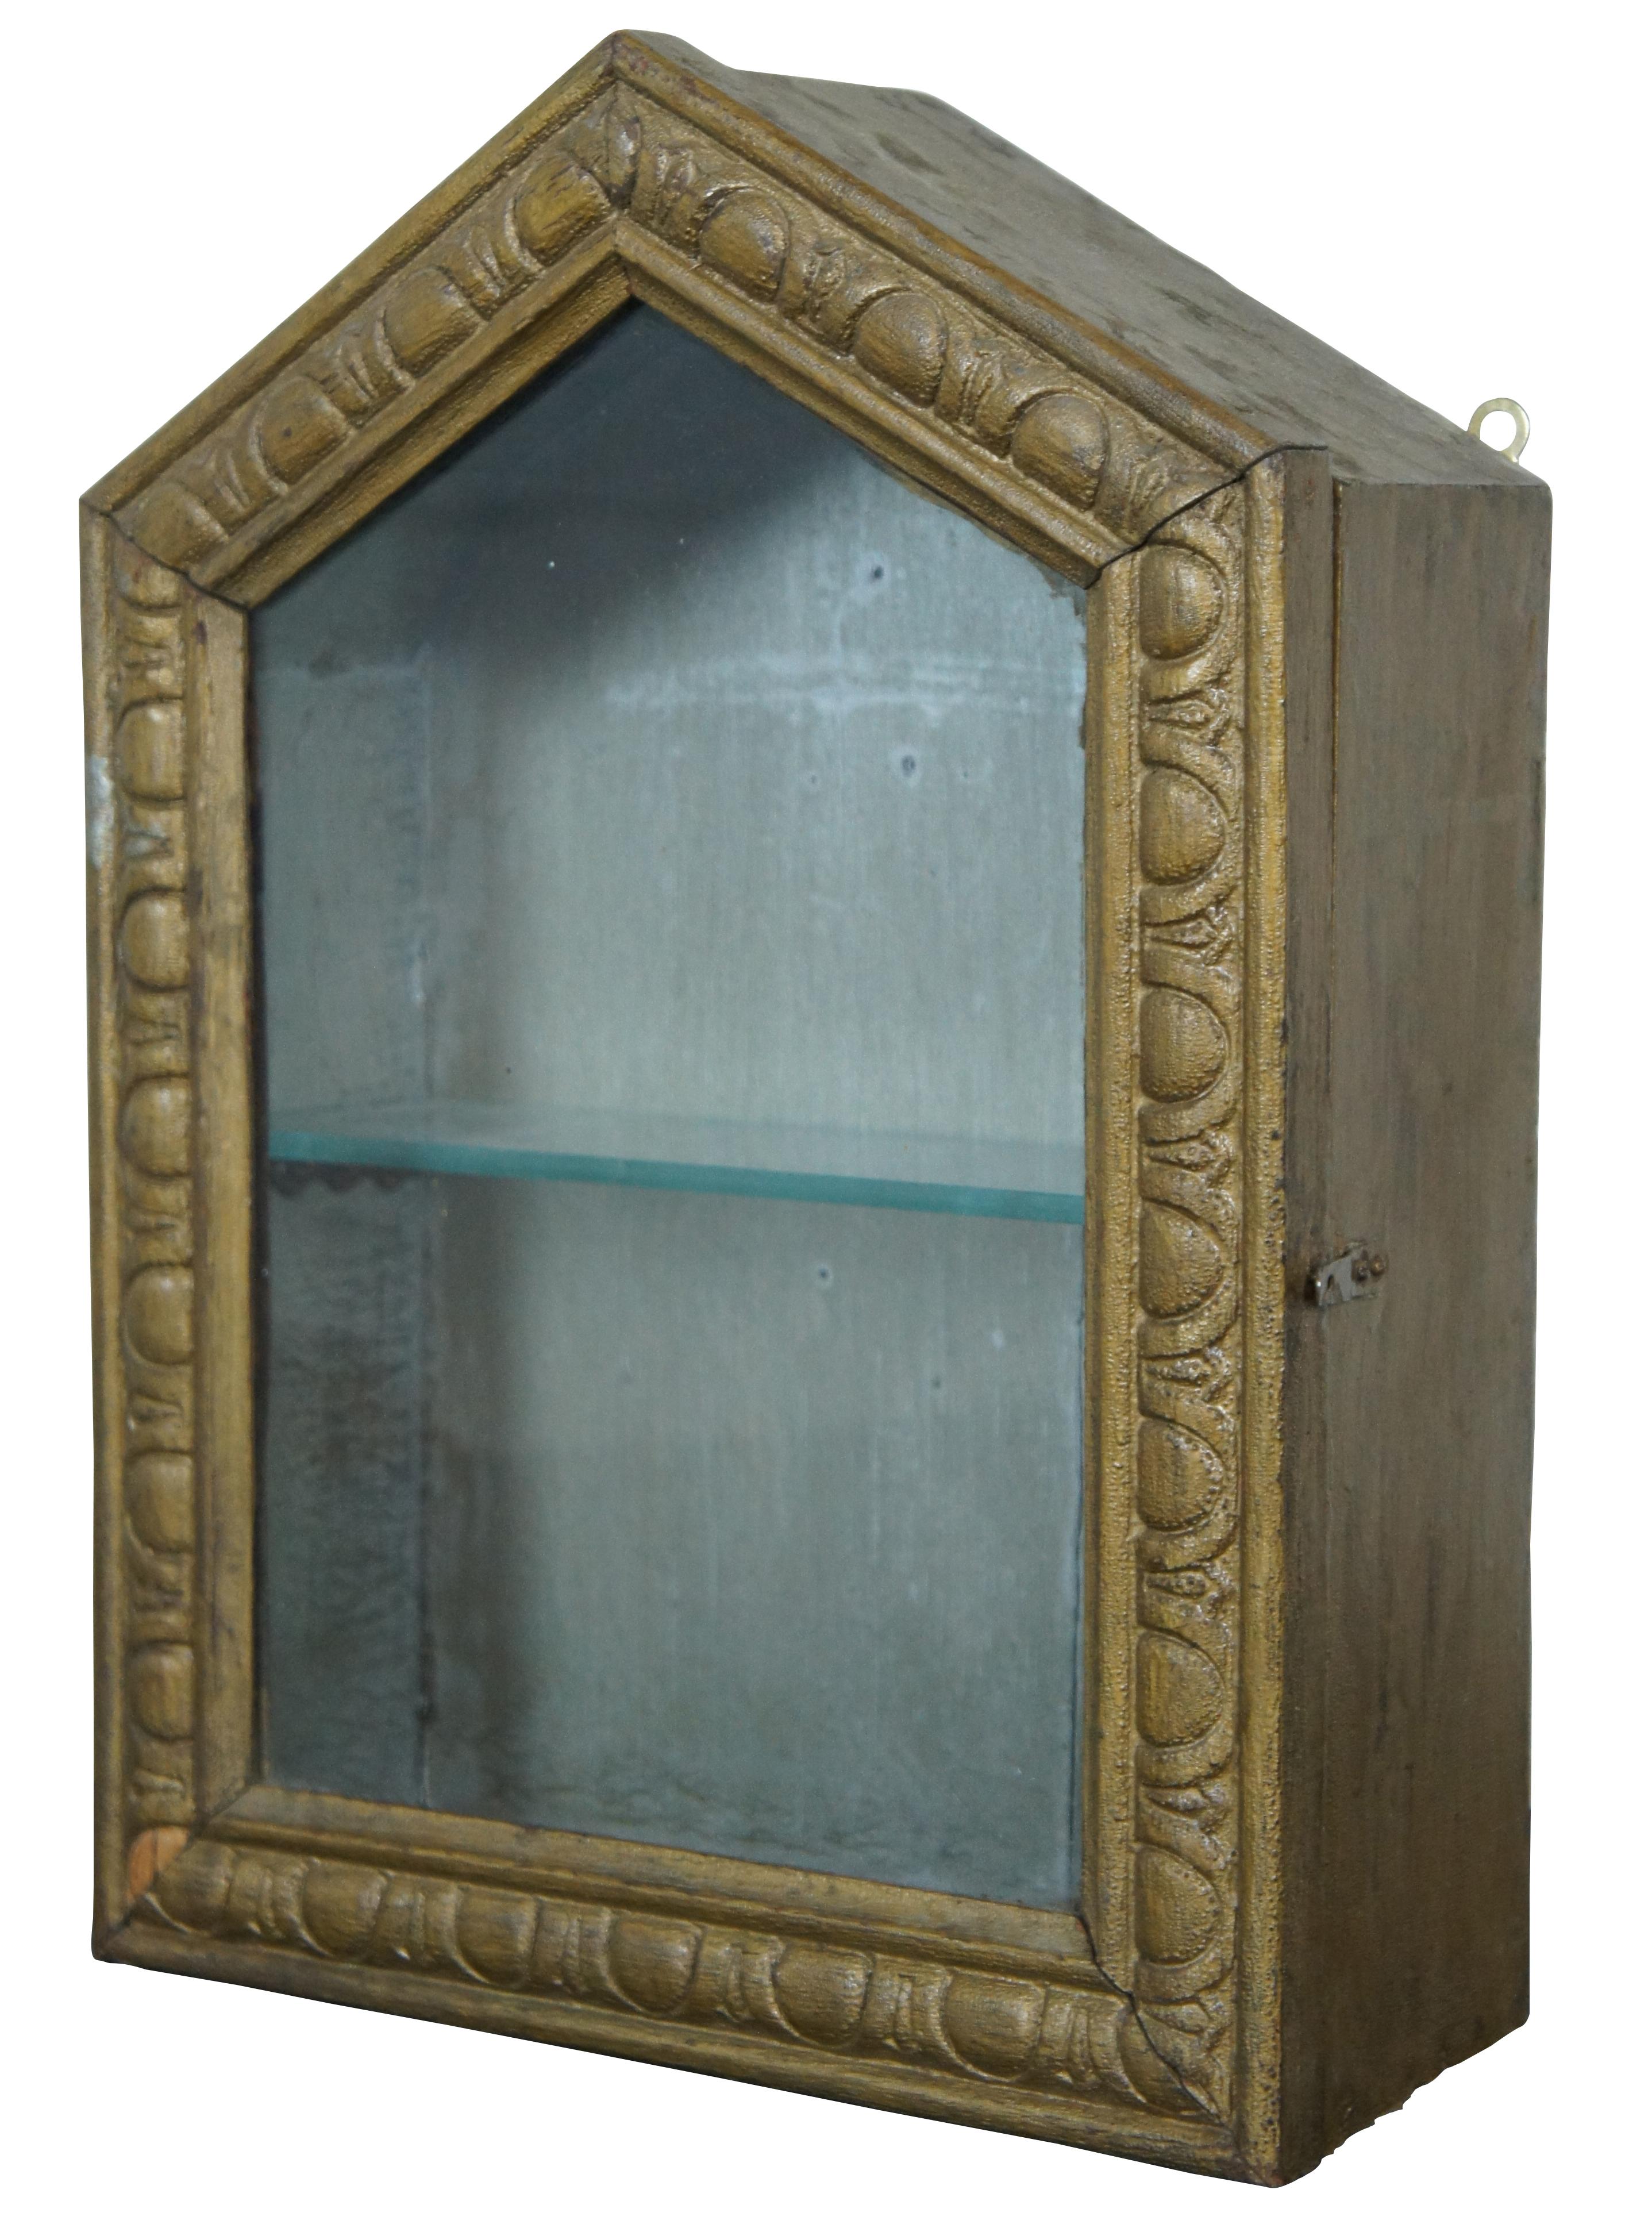 Antique gold painted wood & glass front wall hanging curio or bathroom cabinet with a peaked front and carved details, white painted interior, and one glass shelf inside.
 